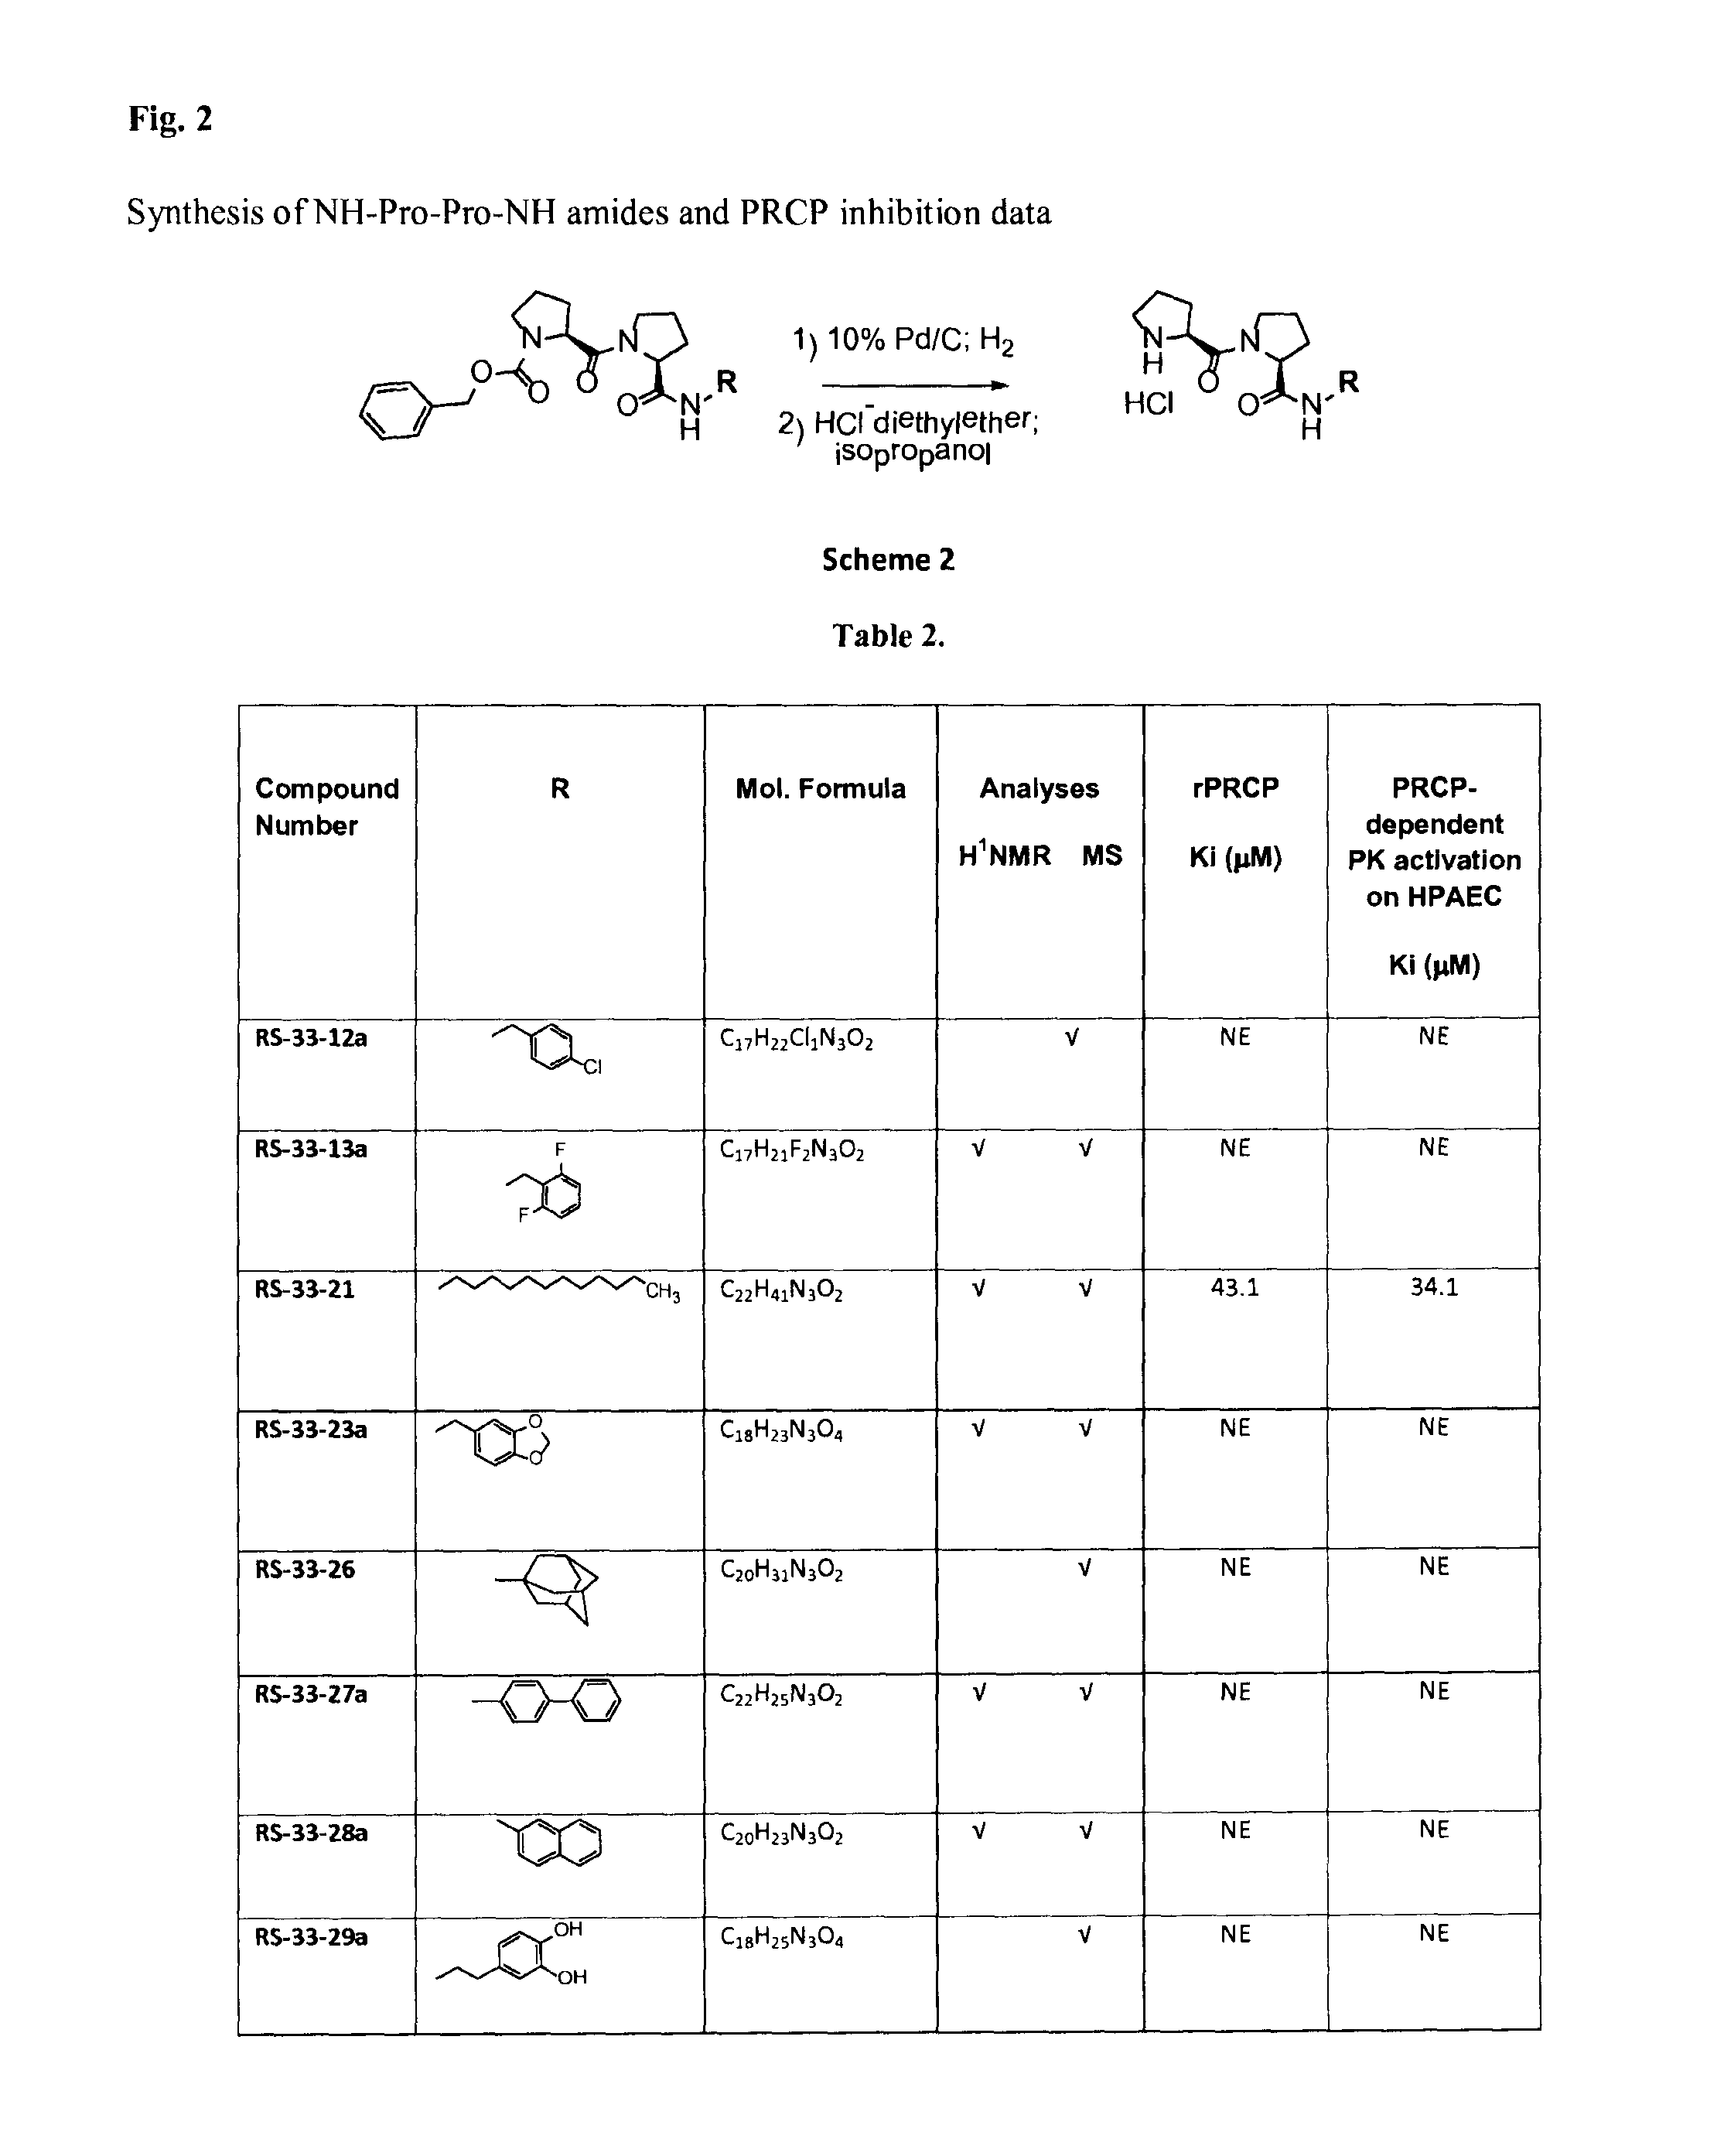 Selective inhibitors of prolylcarboxypeptidase